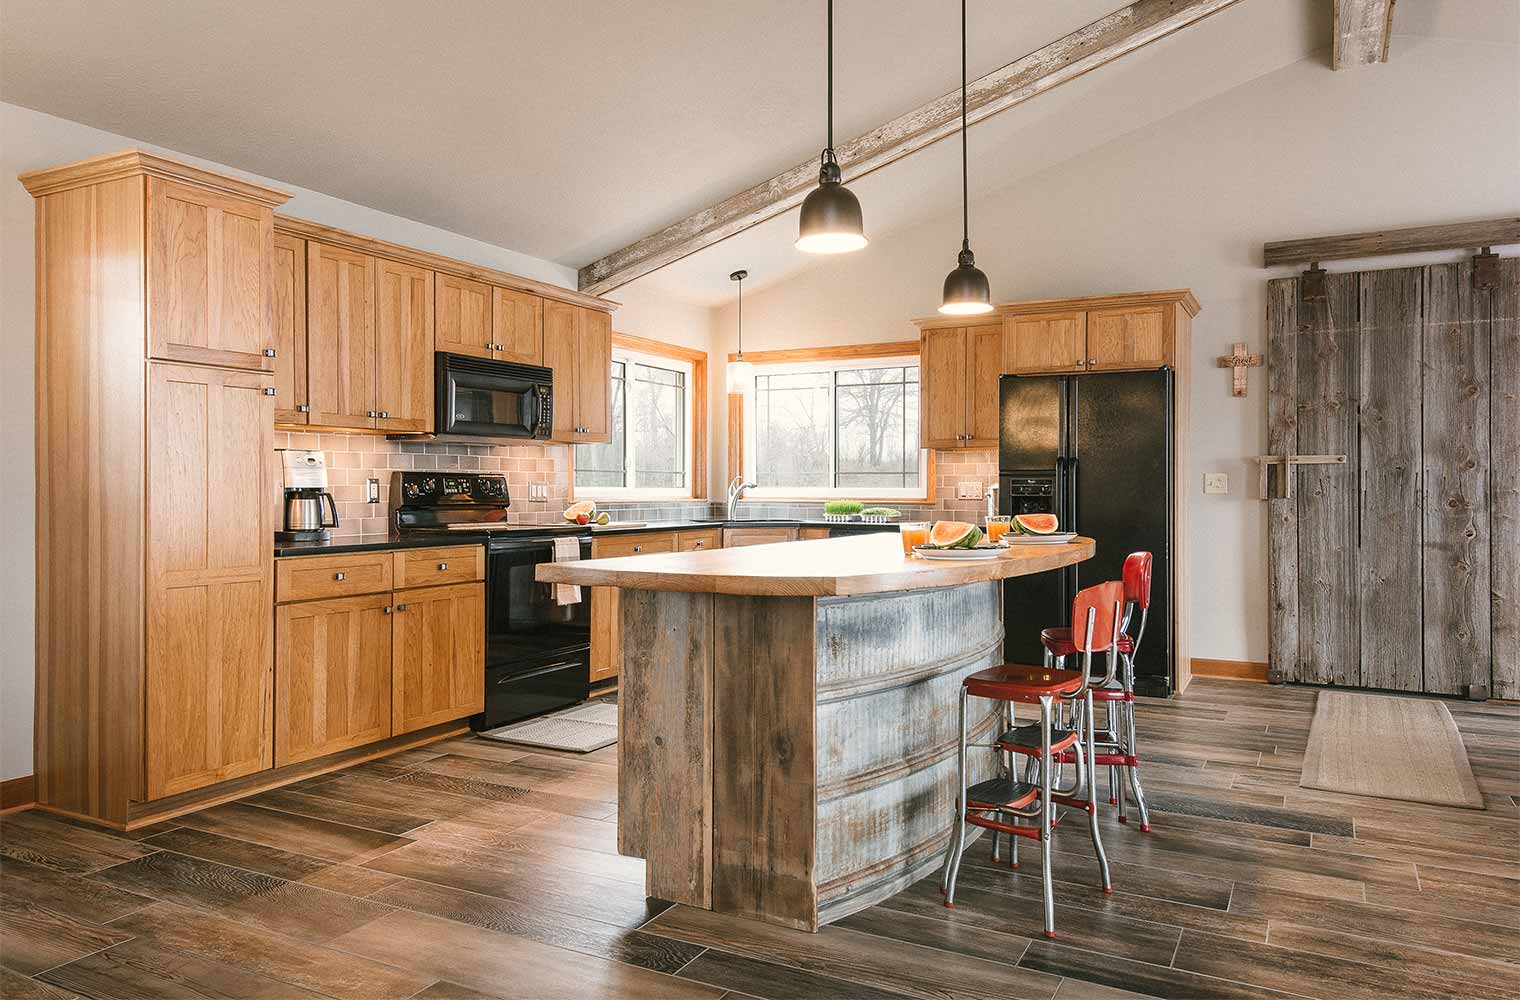 Rustic kitchen with curved island designed with recycled and upcycled metal and barn wood in central Iowa designed and built by Silent Rivers for a rural Iowa retreat